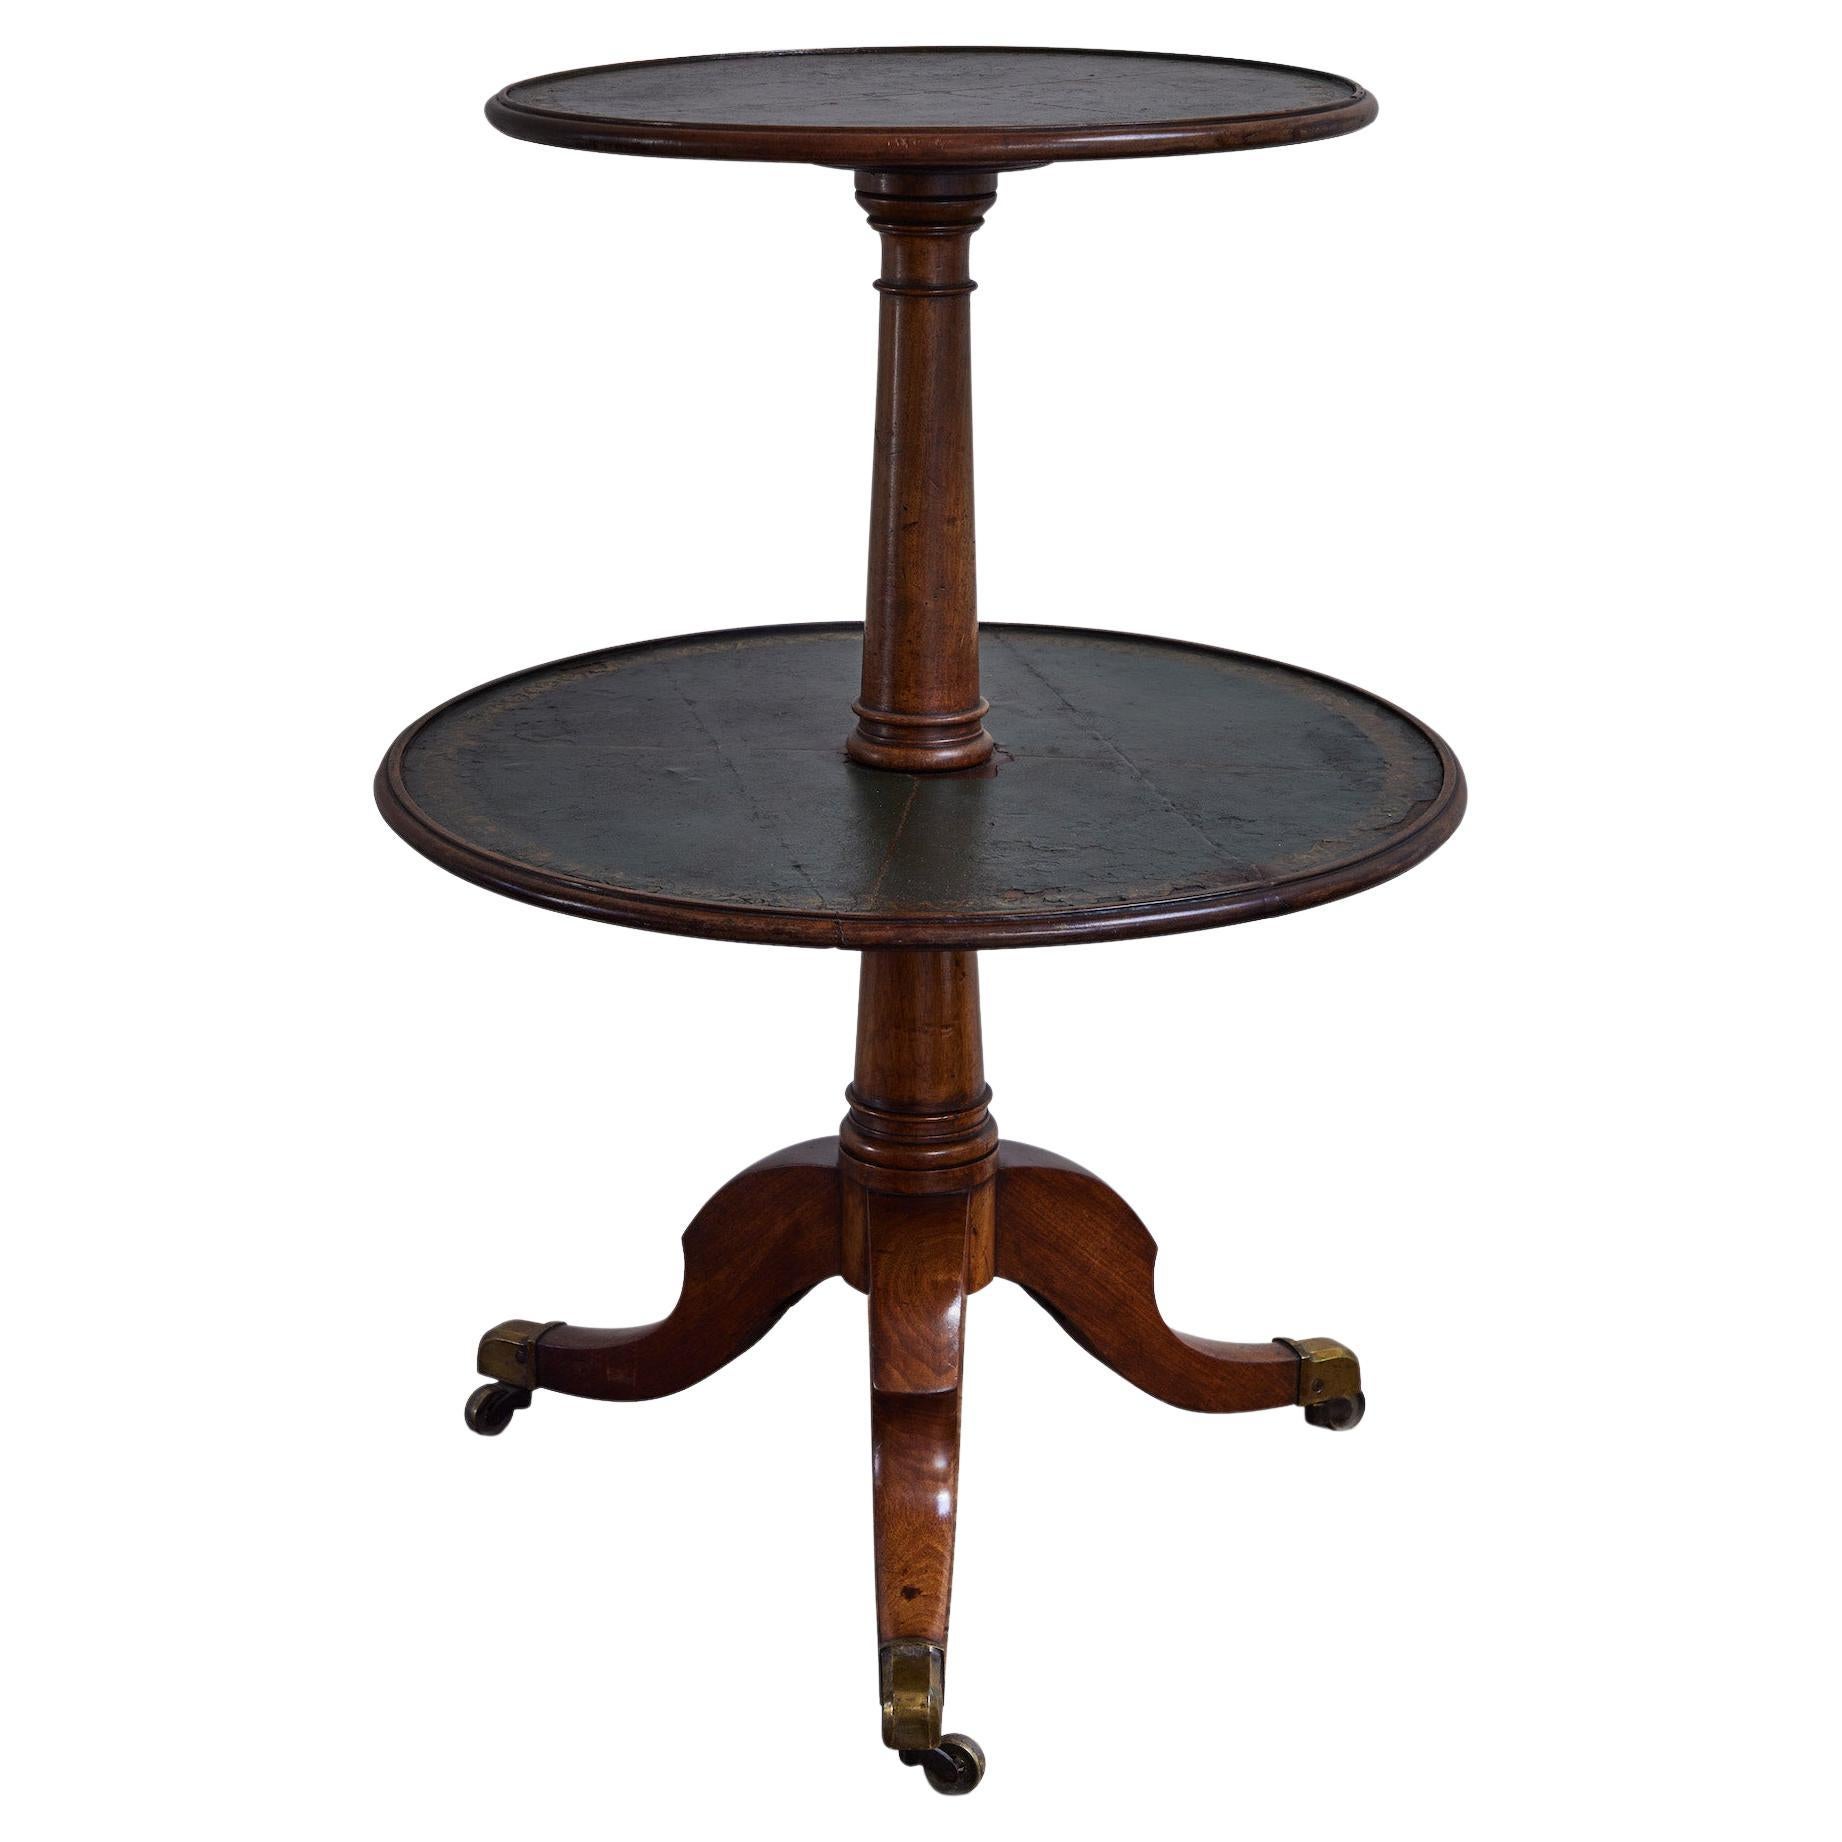 1860s French Two-Tier Round Table with Leather Top For Sale